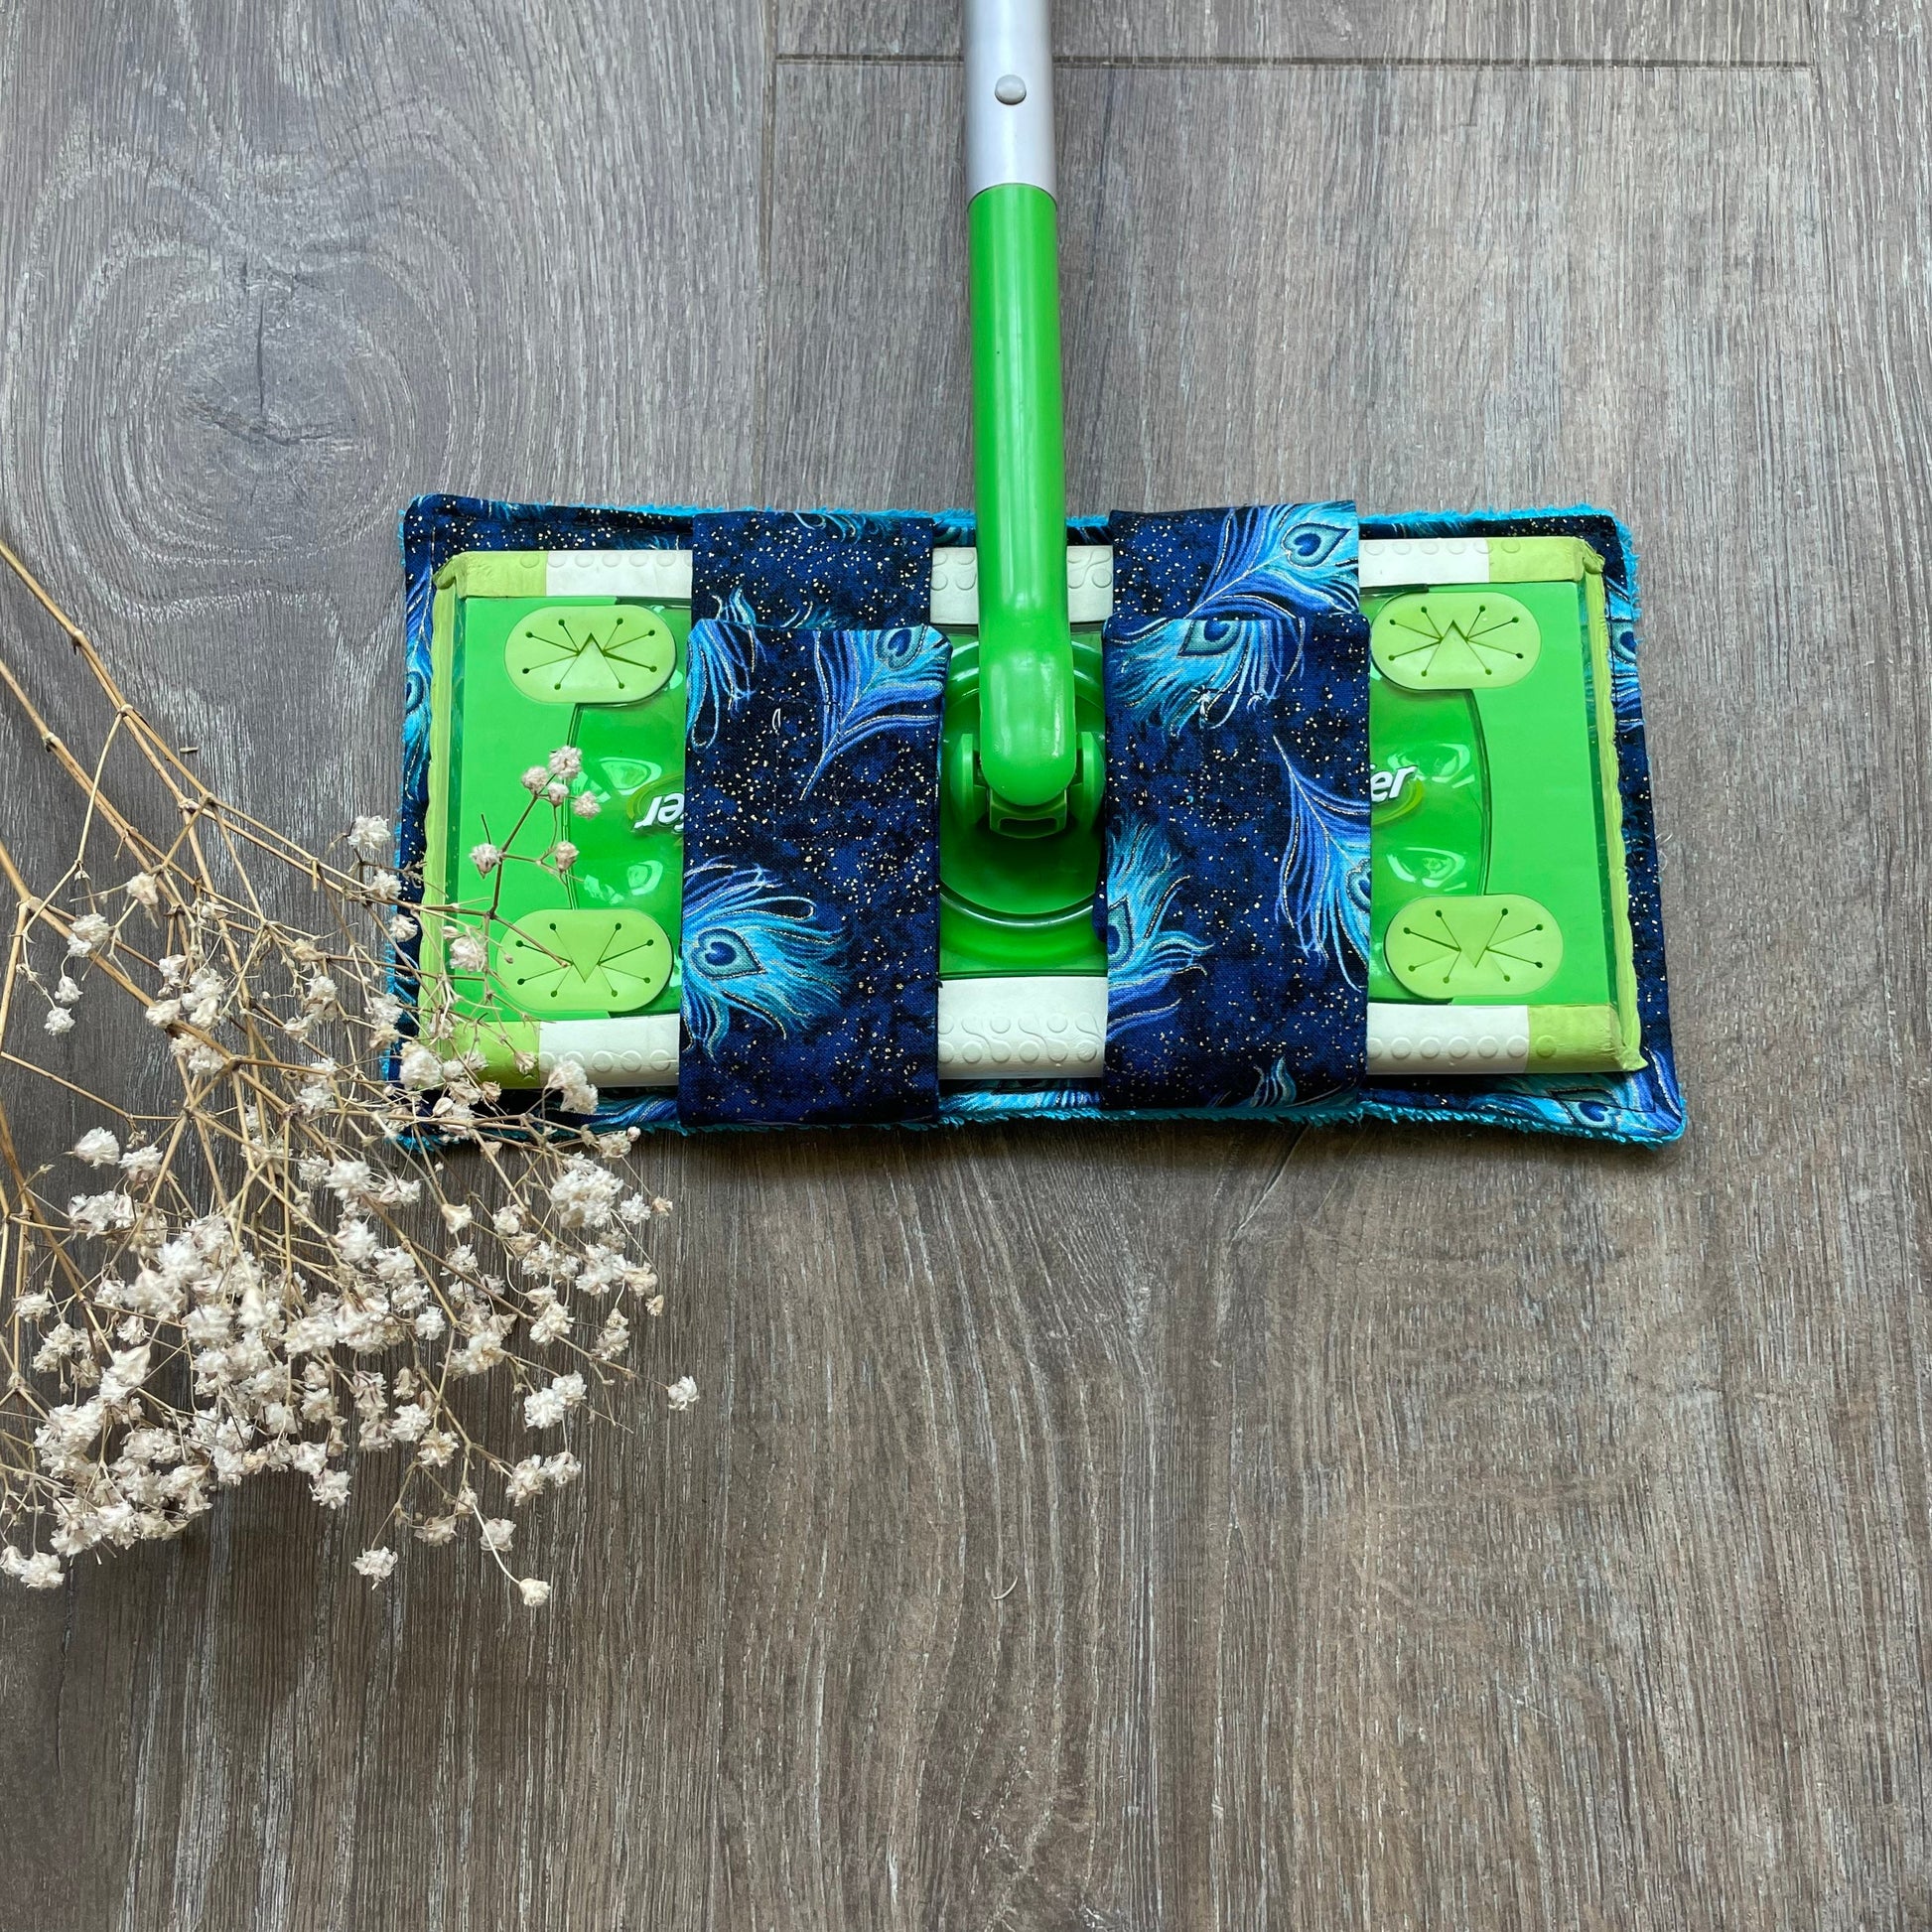 Reusable/washable Duster Mop Pads set of 3 